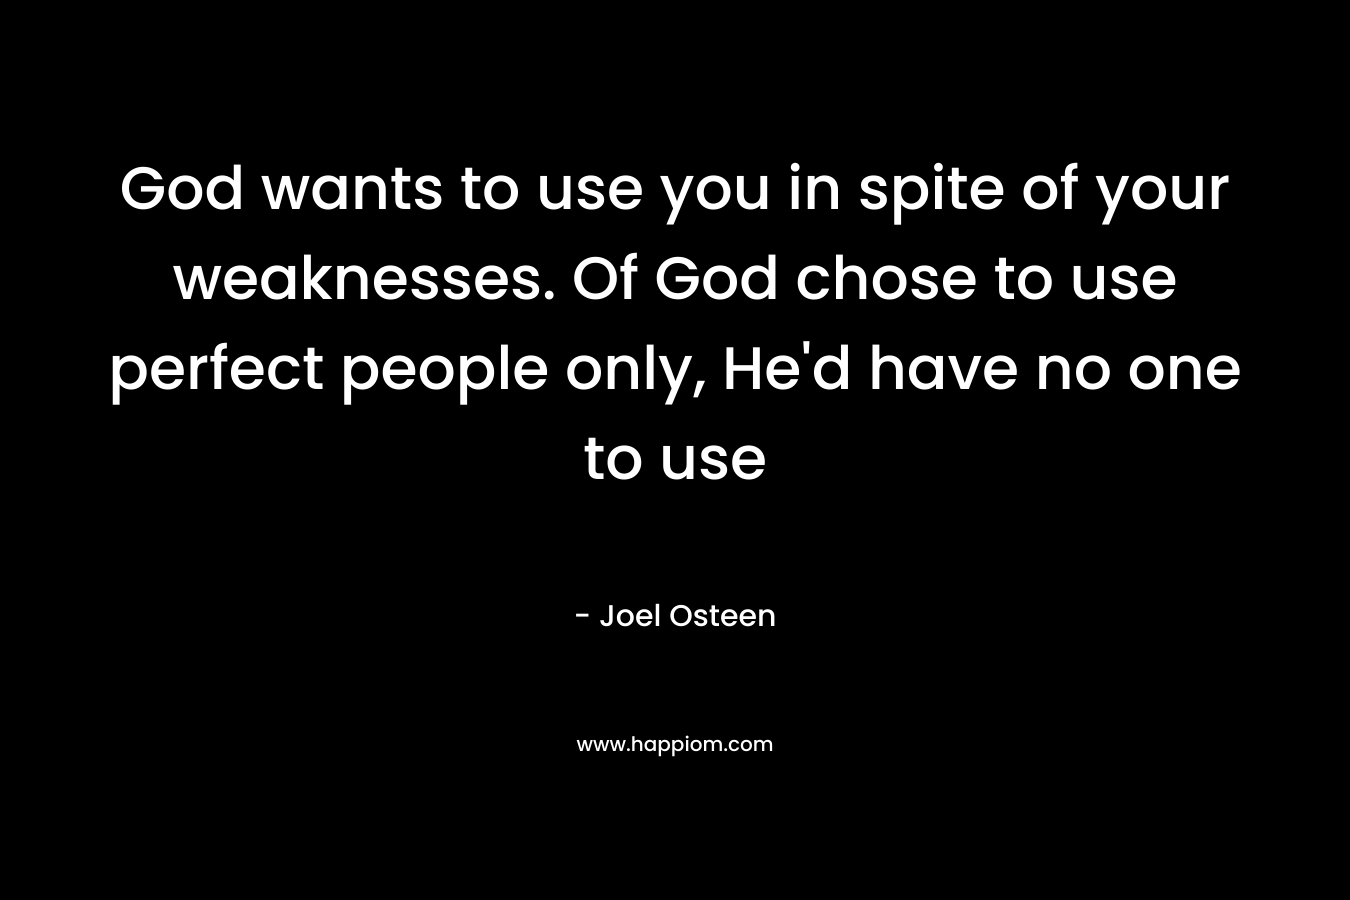 God wants to use you in spite of your weaknesses. Of God chose to use perfect people only, He’d have no one to use – Joel Osteen